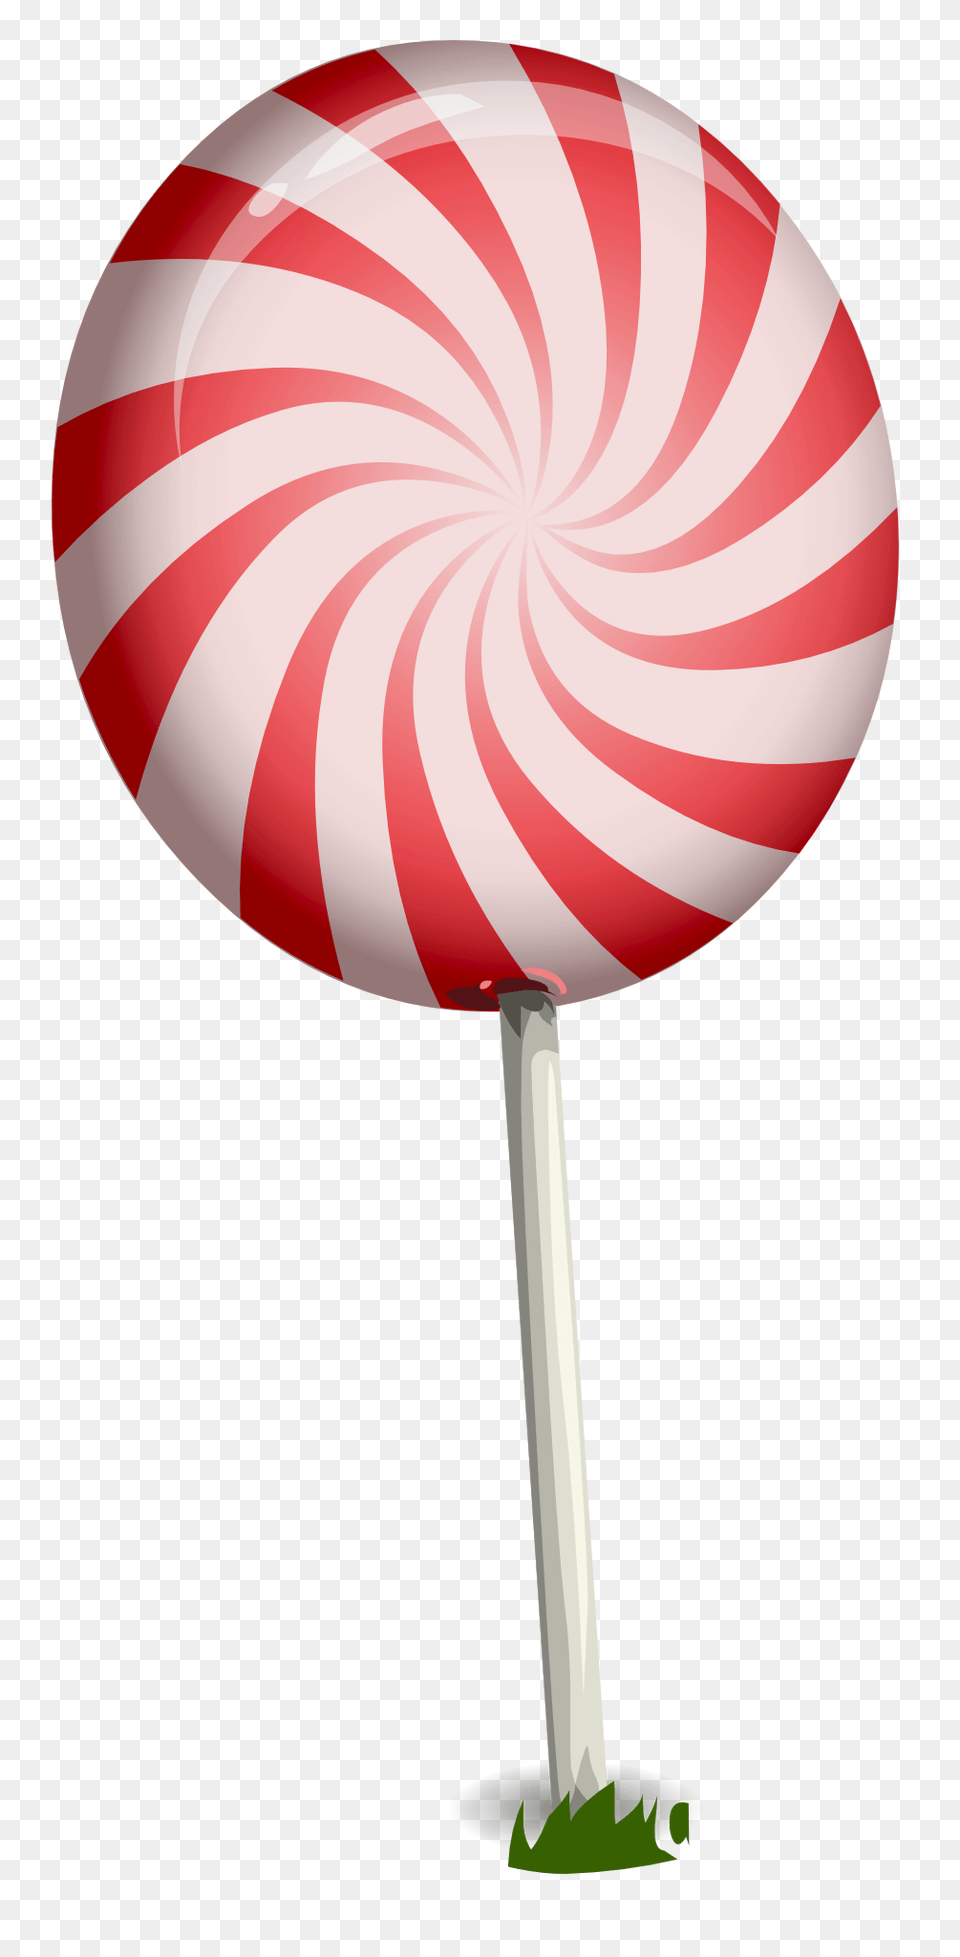 Candy Images, Food, Sweets, Lollipop, Appliance Png